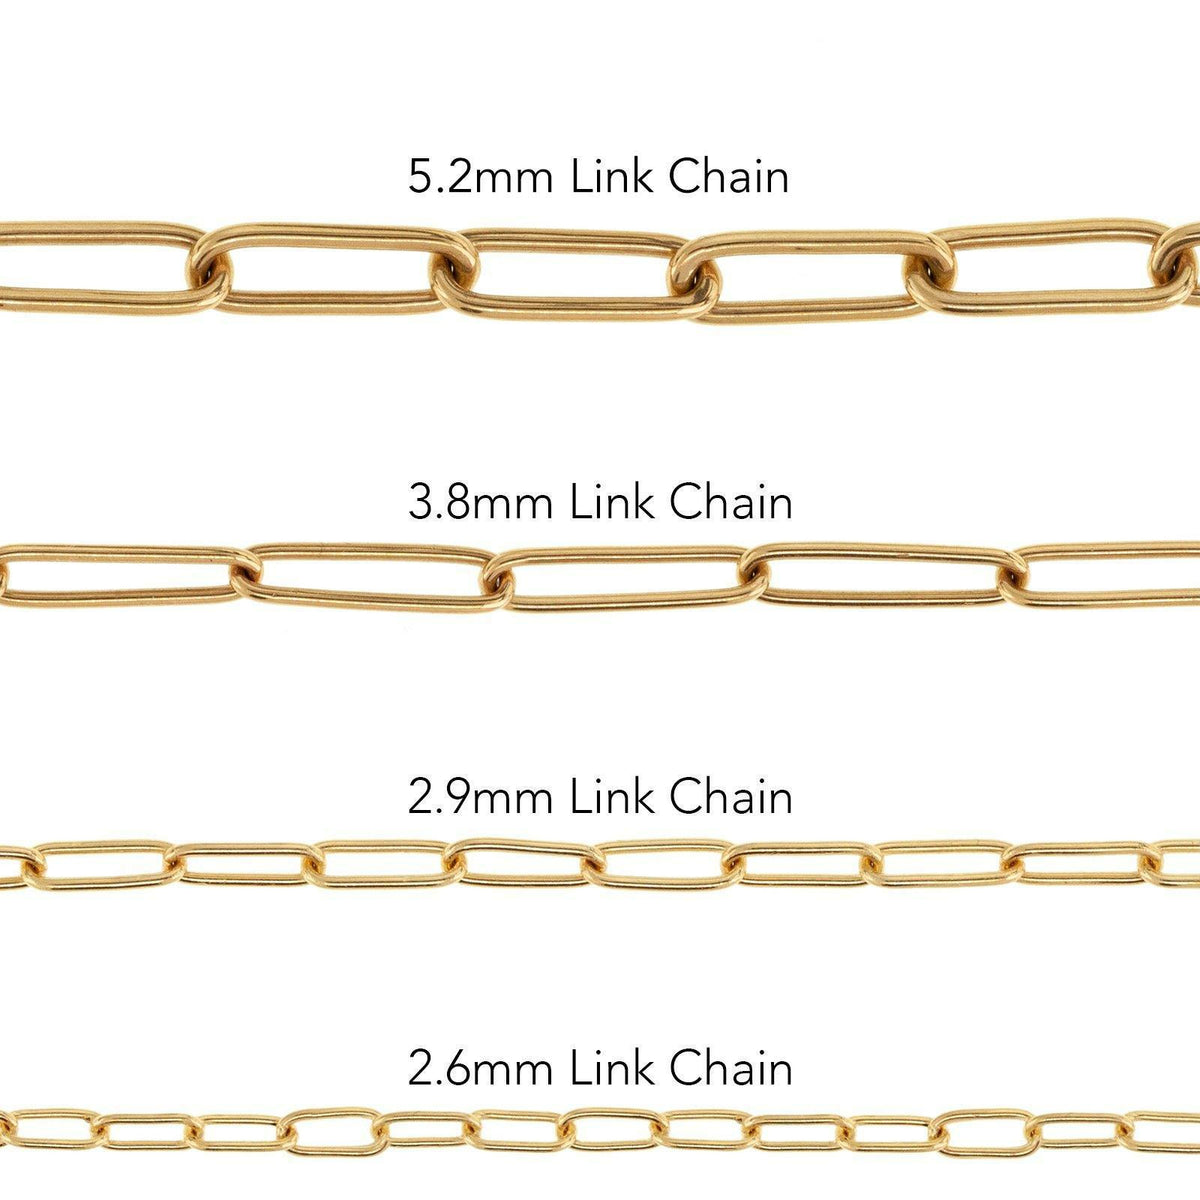 3.8mm Gold Link Carabiner Chain